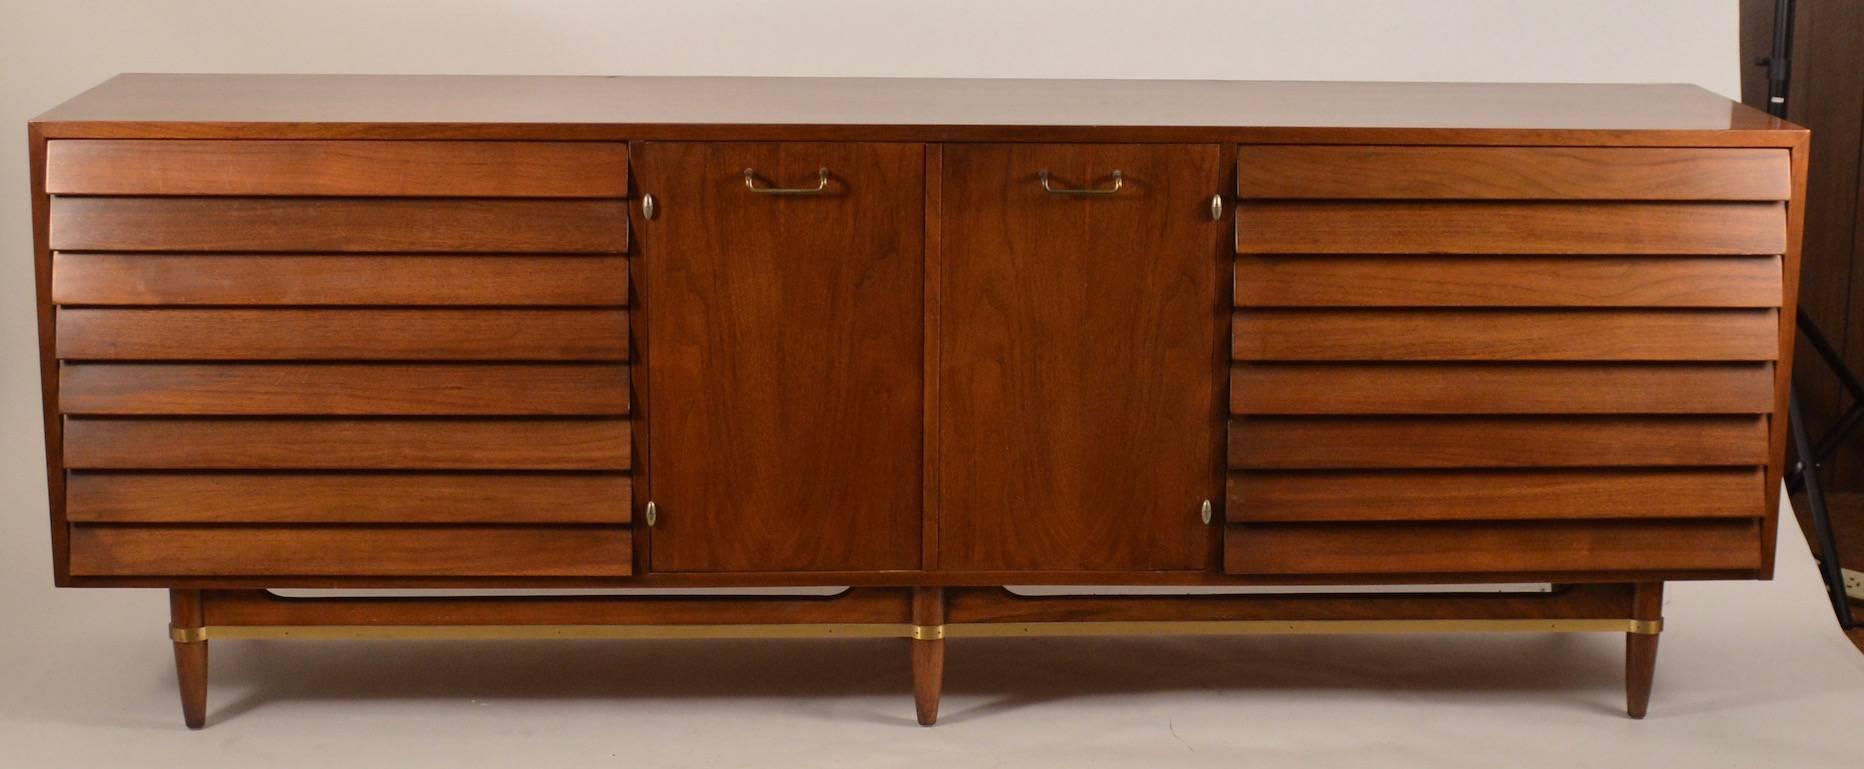 Very nice example of the work of Merton Gershun for American of Martinsville. Two banks of louvered drawers flank doors which open to storage drawers. Very fine original condition, showing only very minor cosmetic wear. Clean ready to use, great